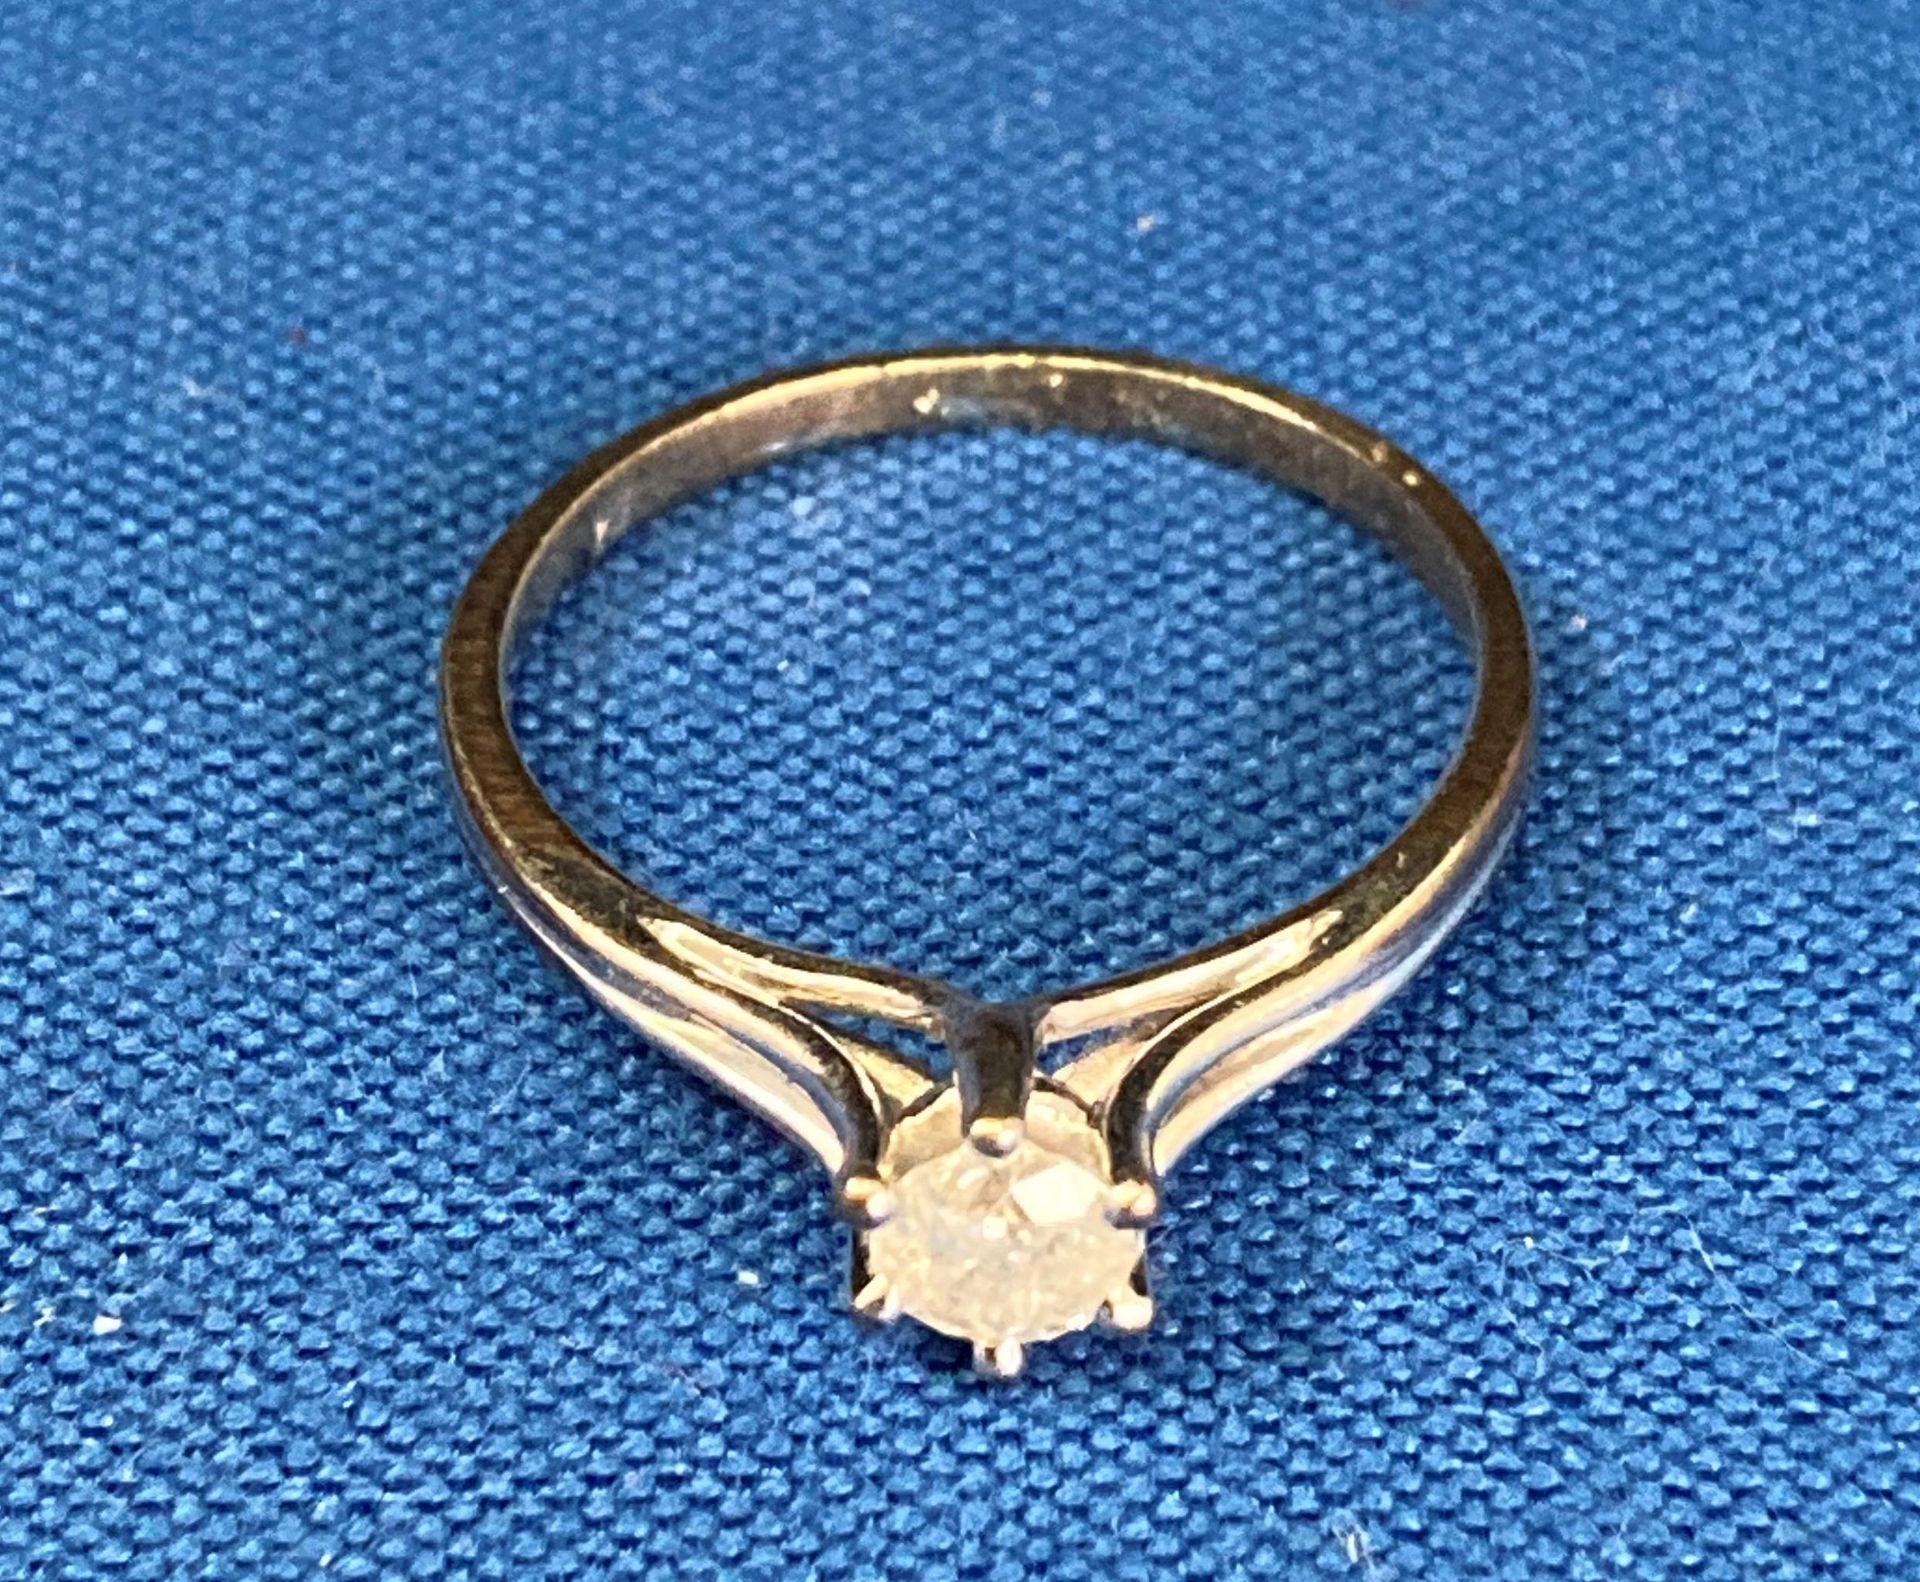 9ct white and yellow gold solitaire diamond ring, size P. Weight: 2.